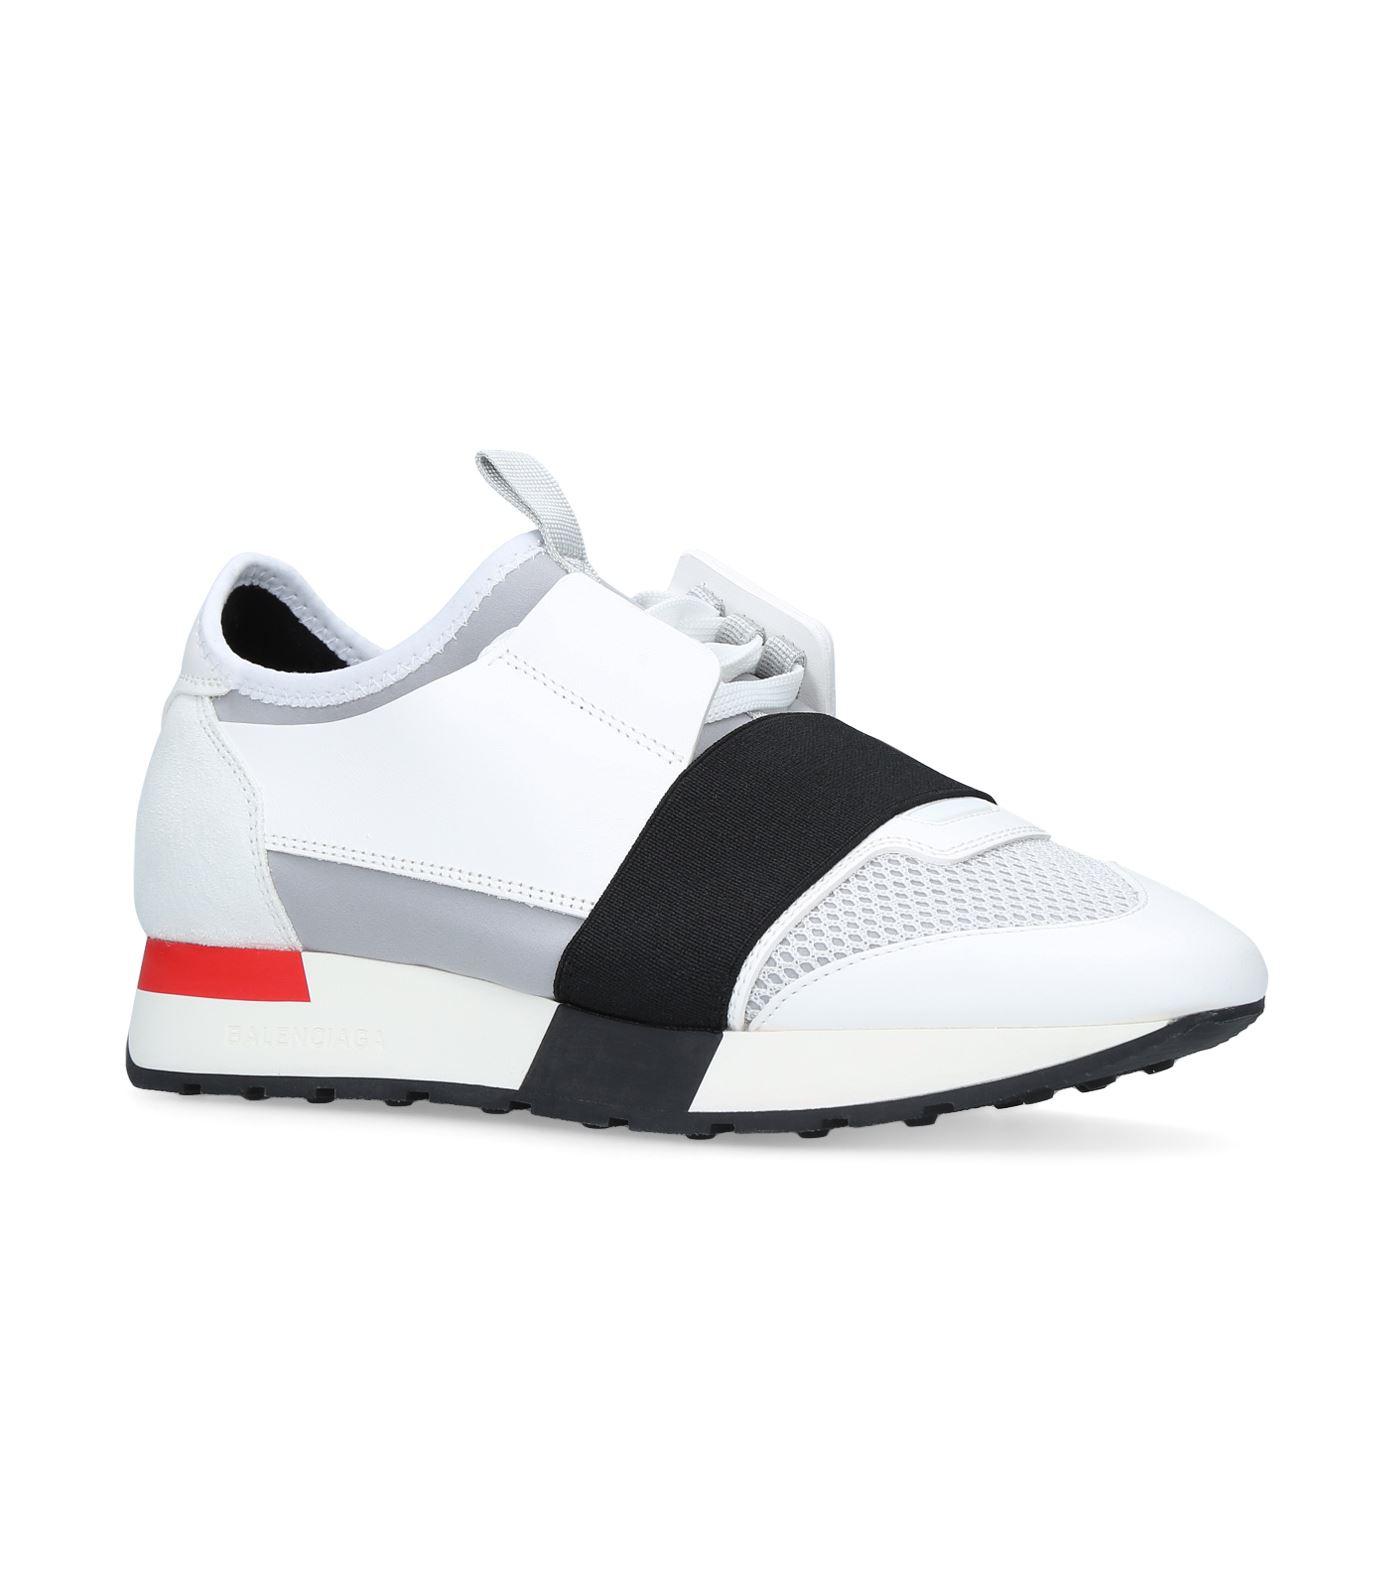 Balenciaga Race Runner Leather, Suede, Mesh And Neoprene Sneakers in